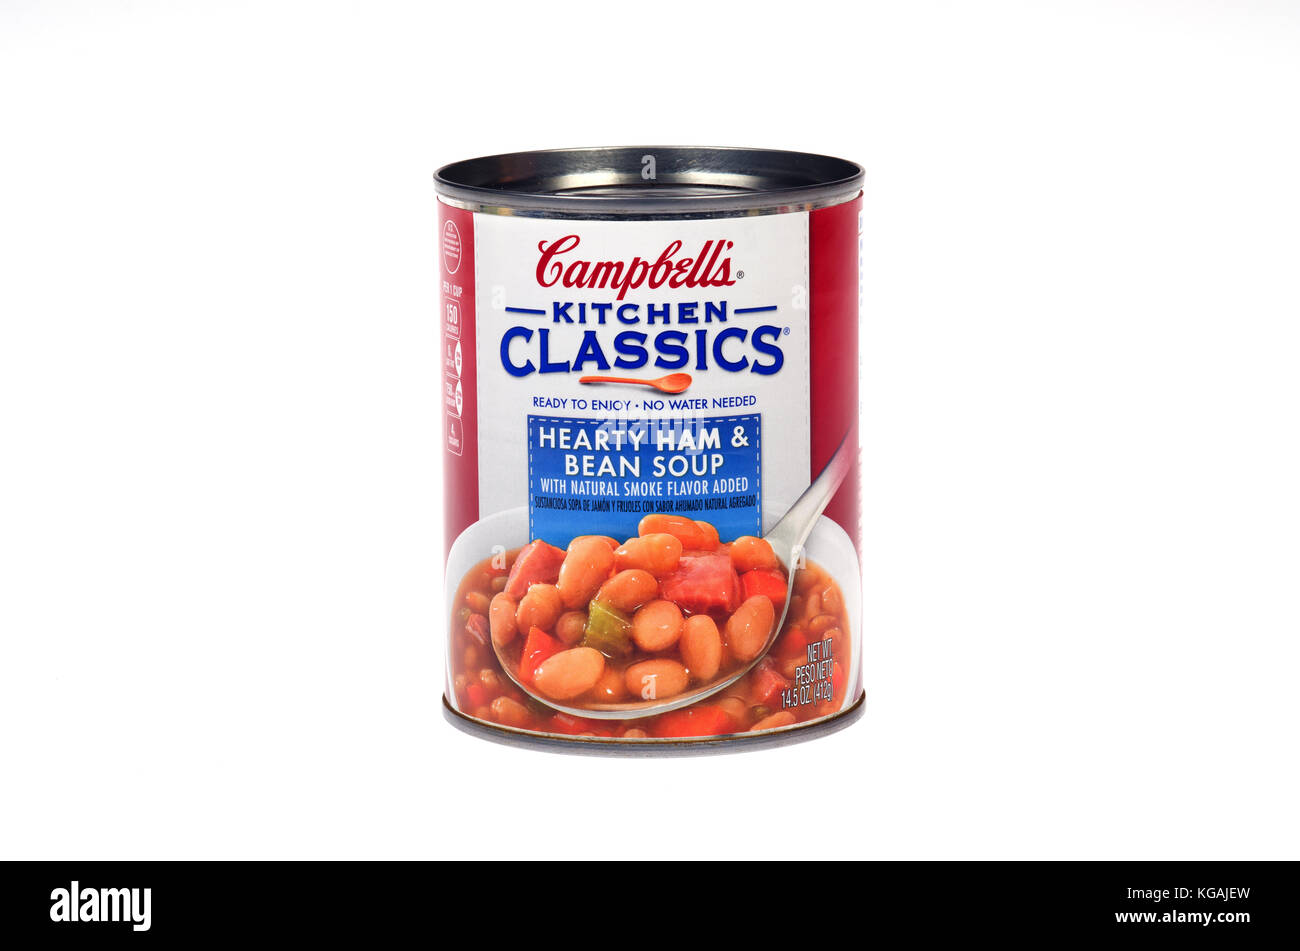 Campbell’s Hearty Ham and Beans Kitchen Classics soup can isolated on white background Stock Photo